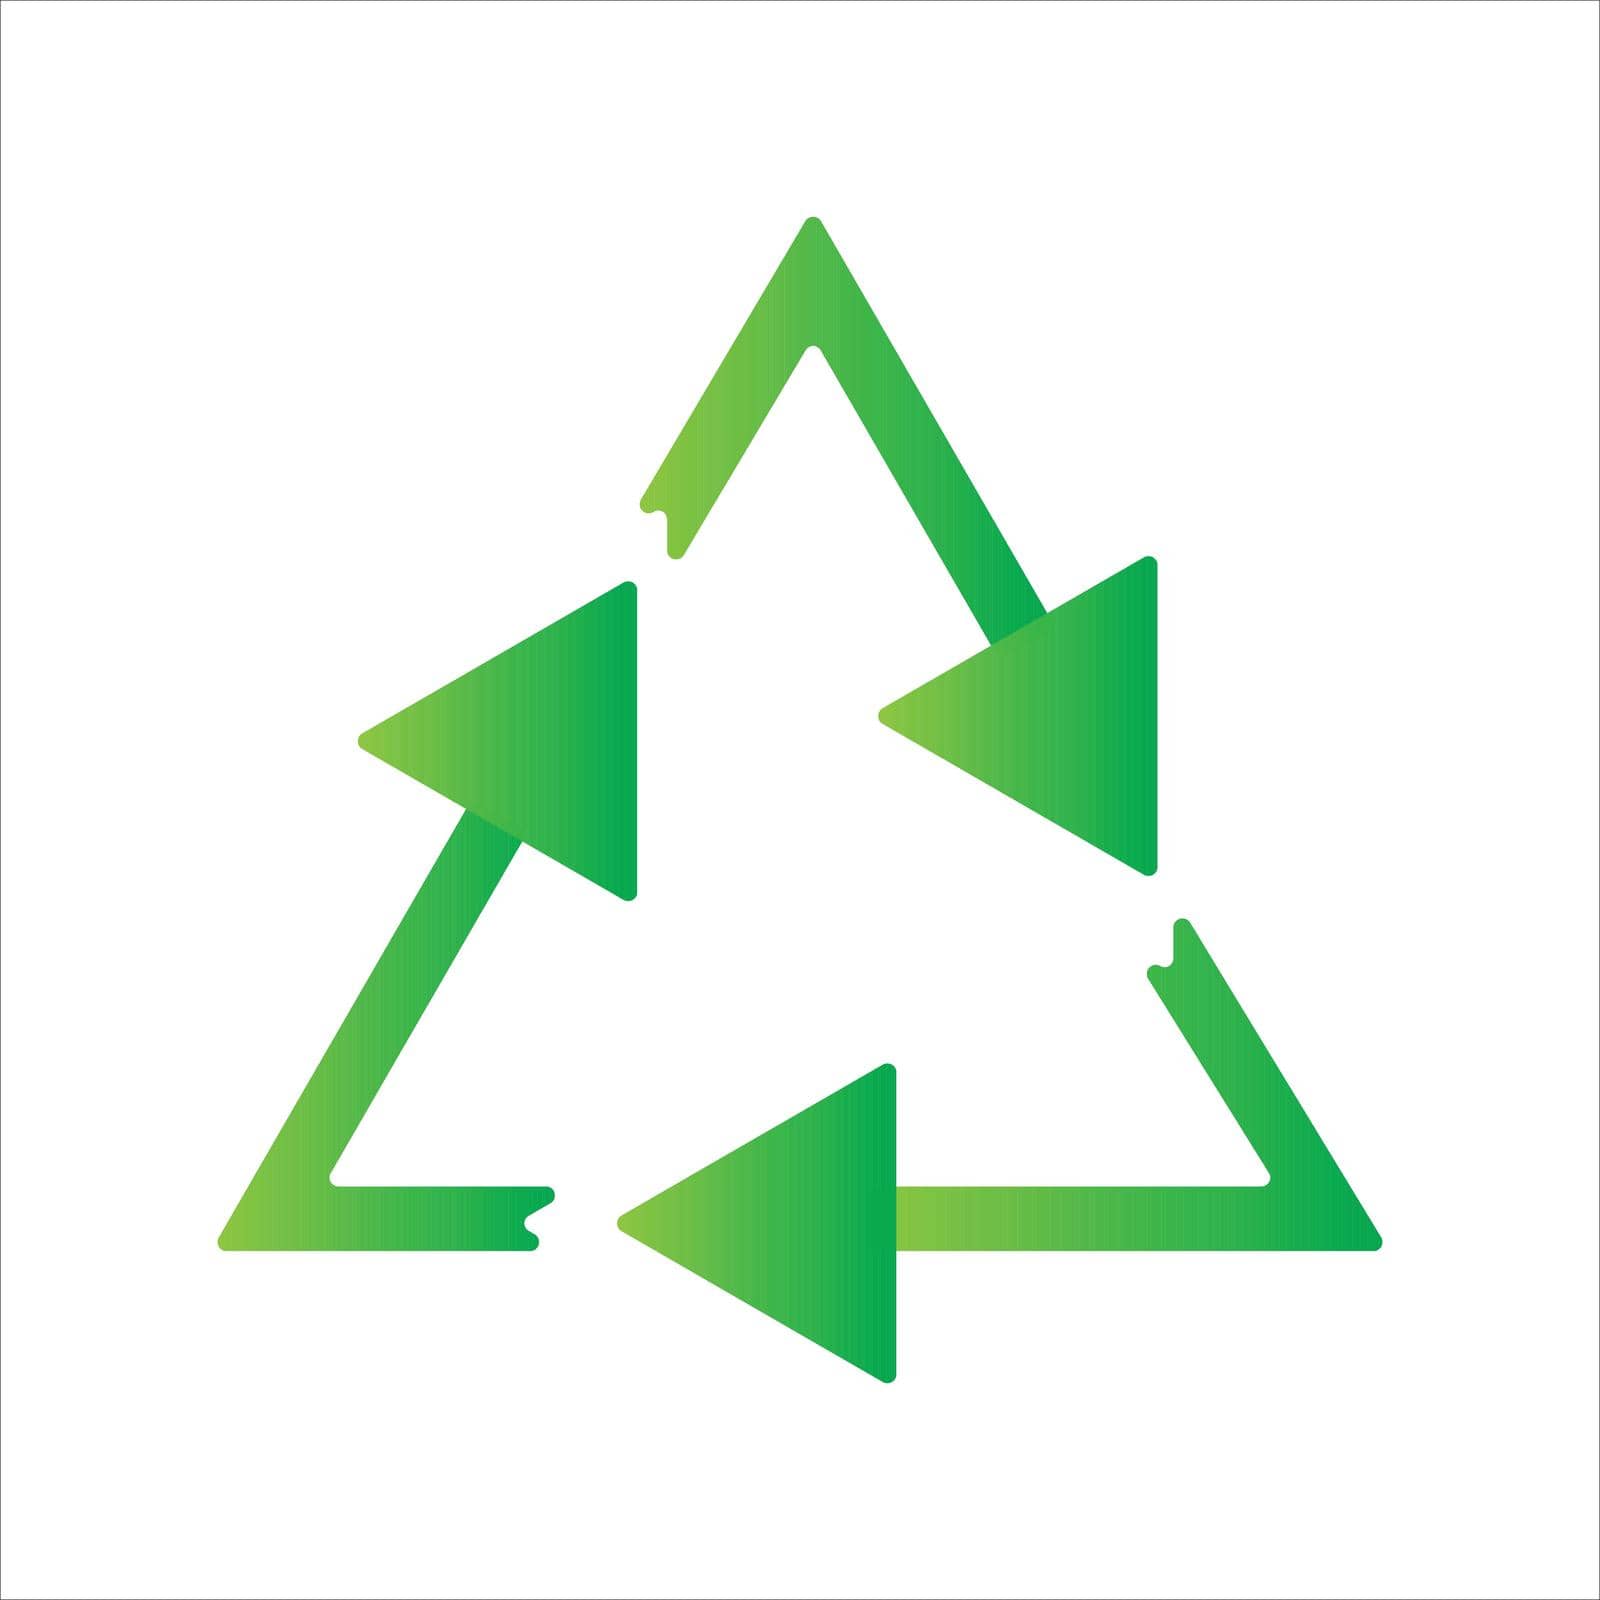 recycling ilustration icon.gradient style design style icon concept